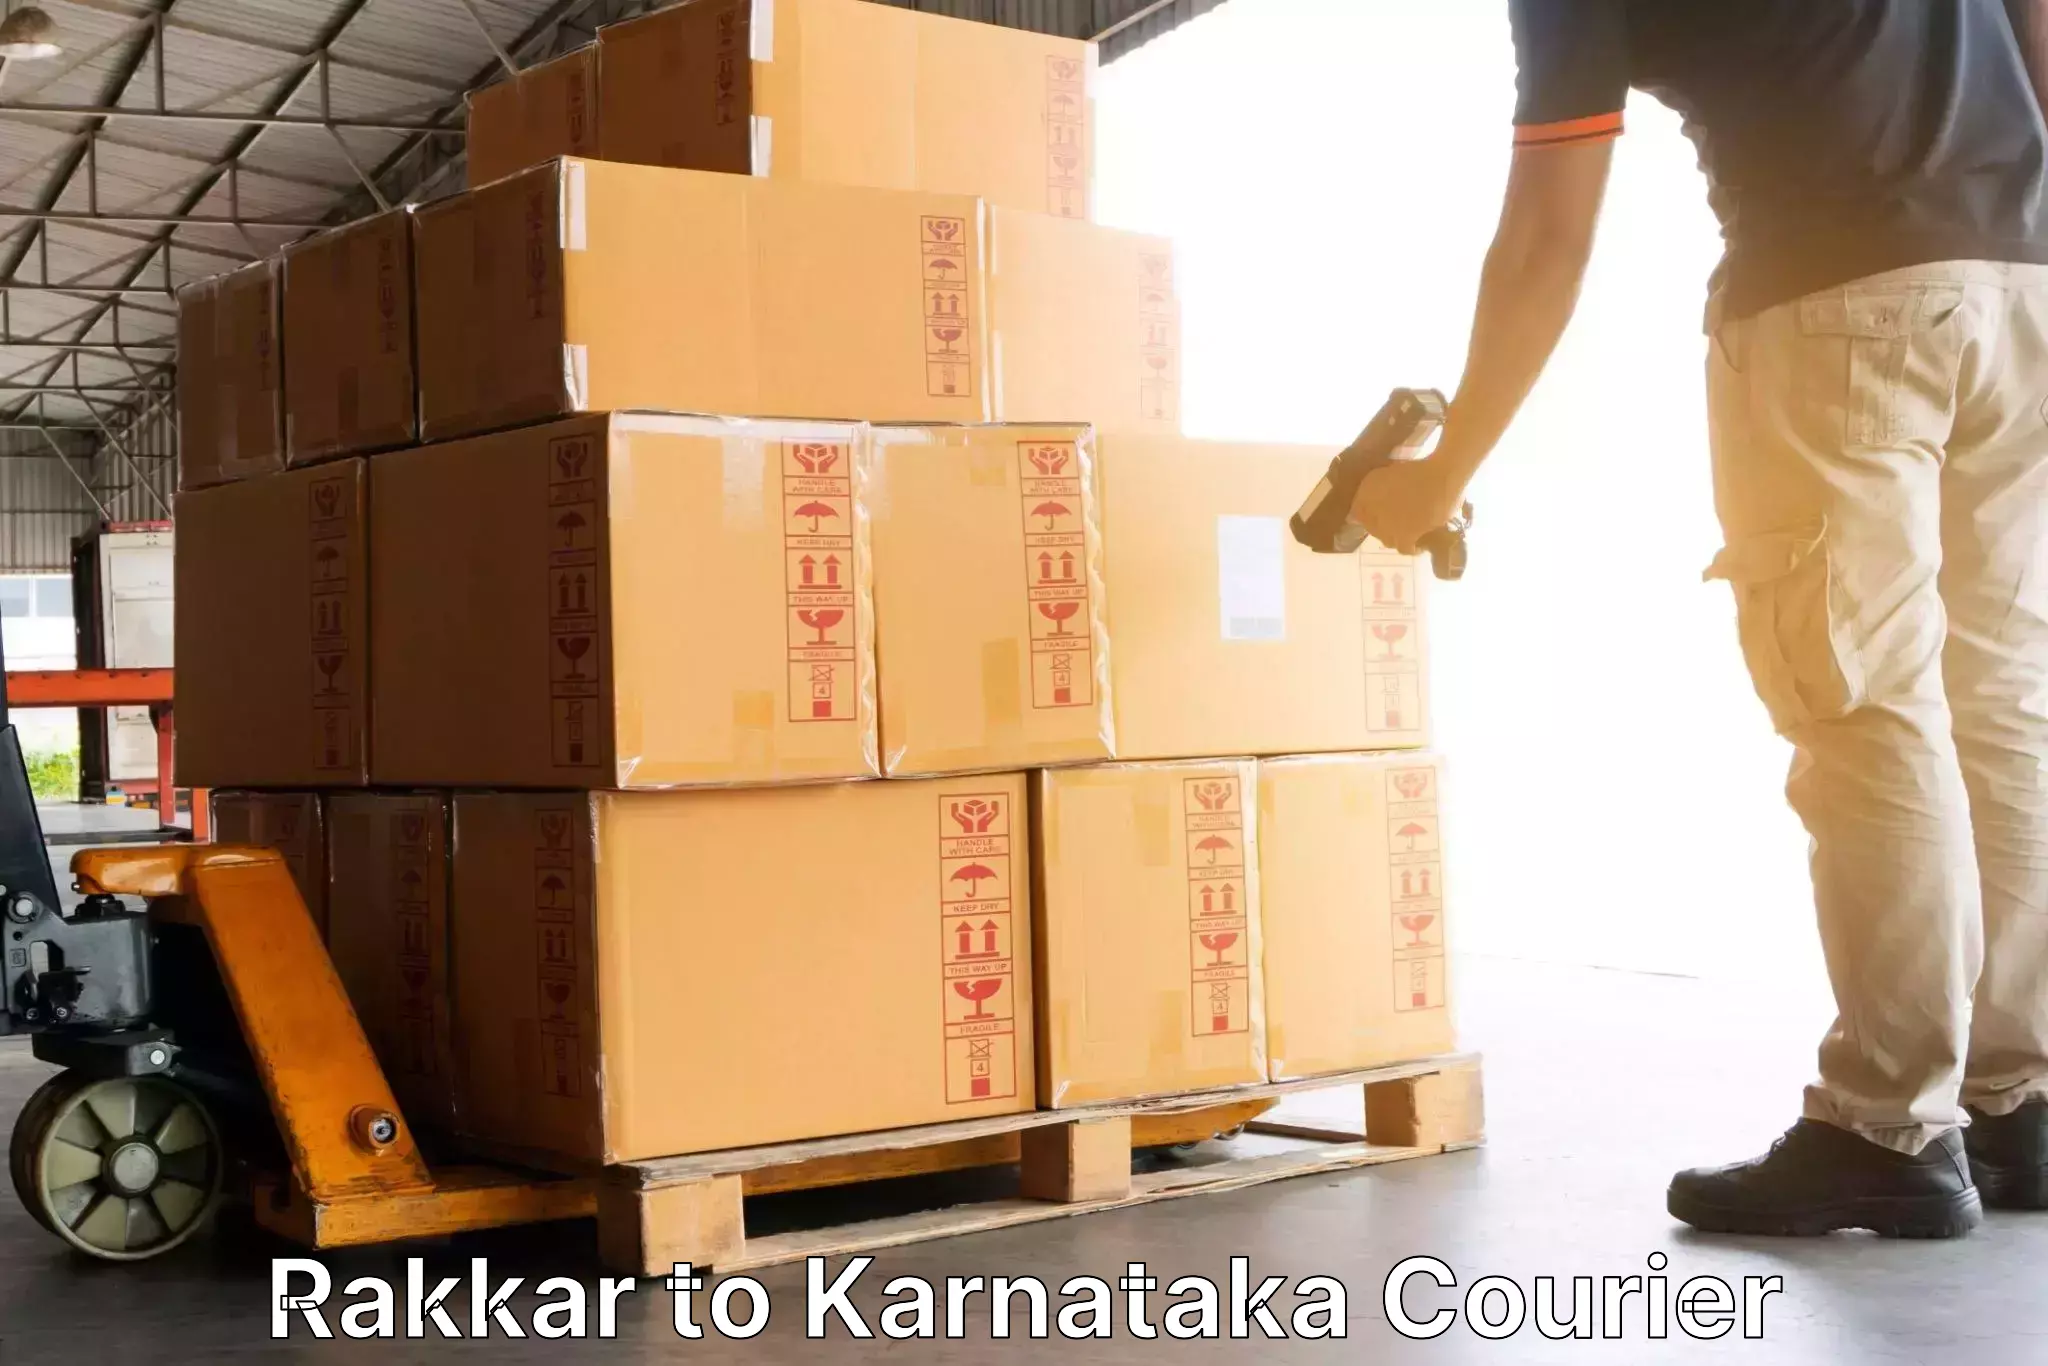 Courier service booking Rakkar to Manipal Academy of Higher Education